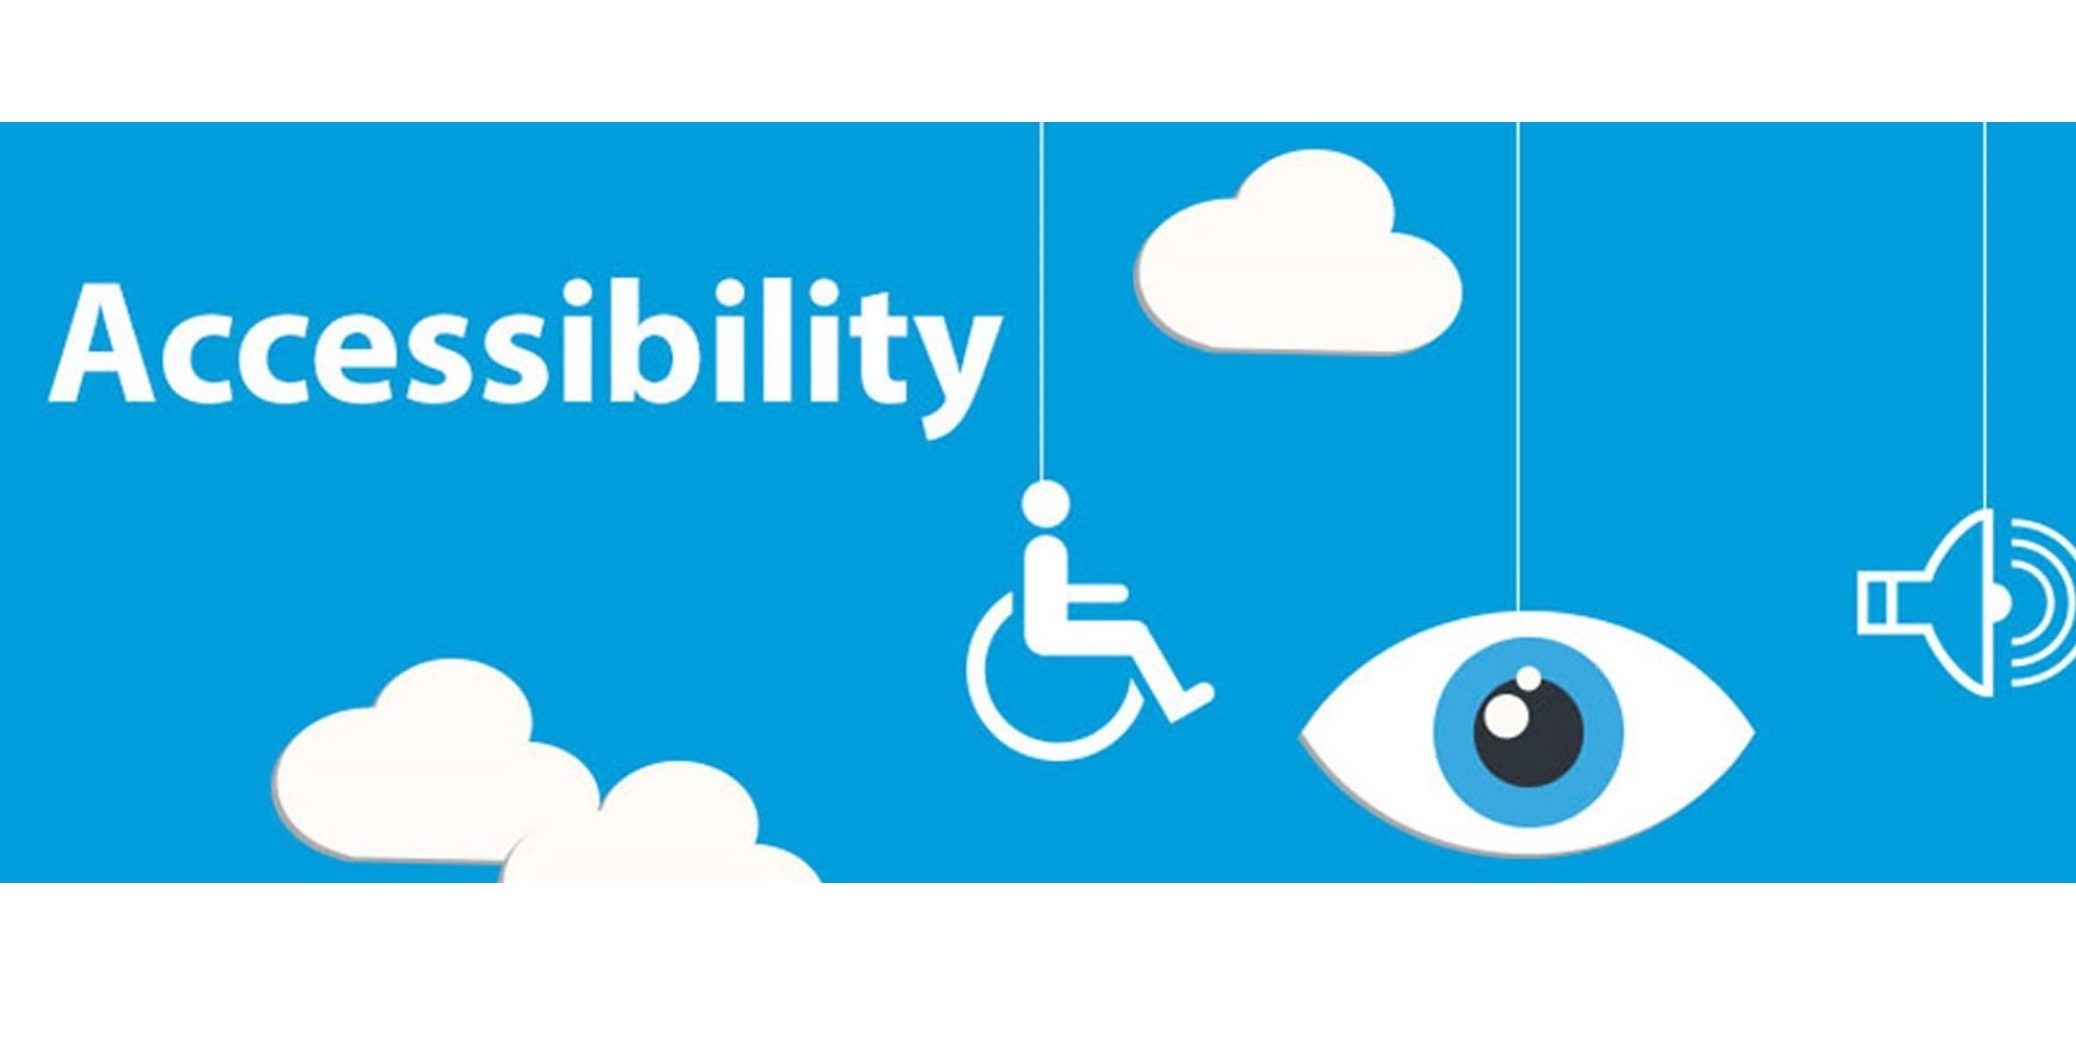 Accessibilty With Blue Screen